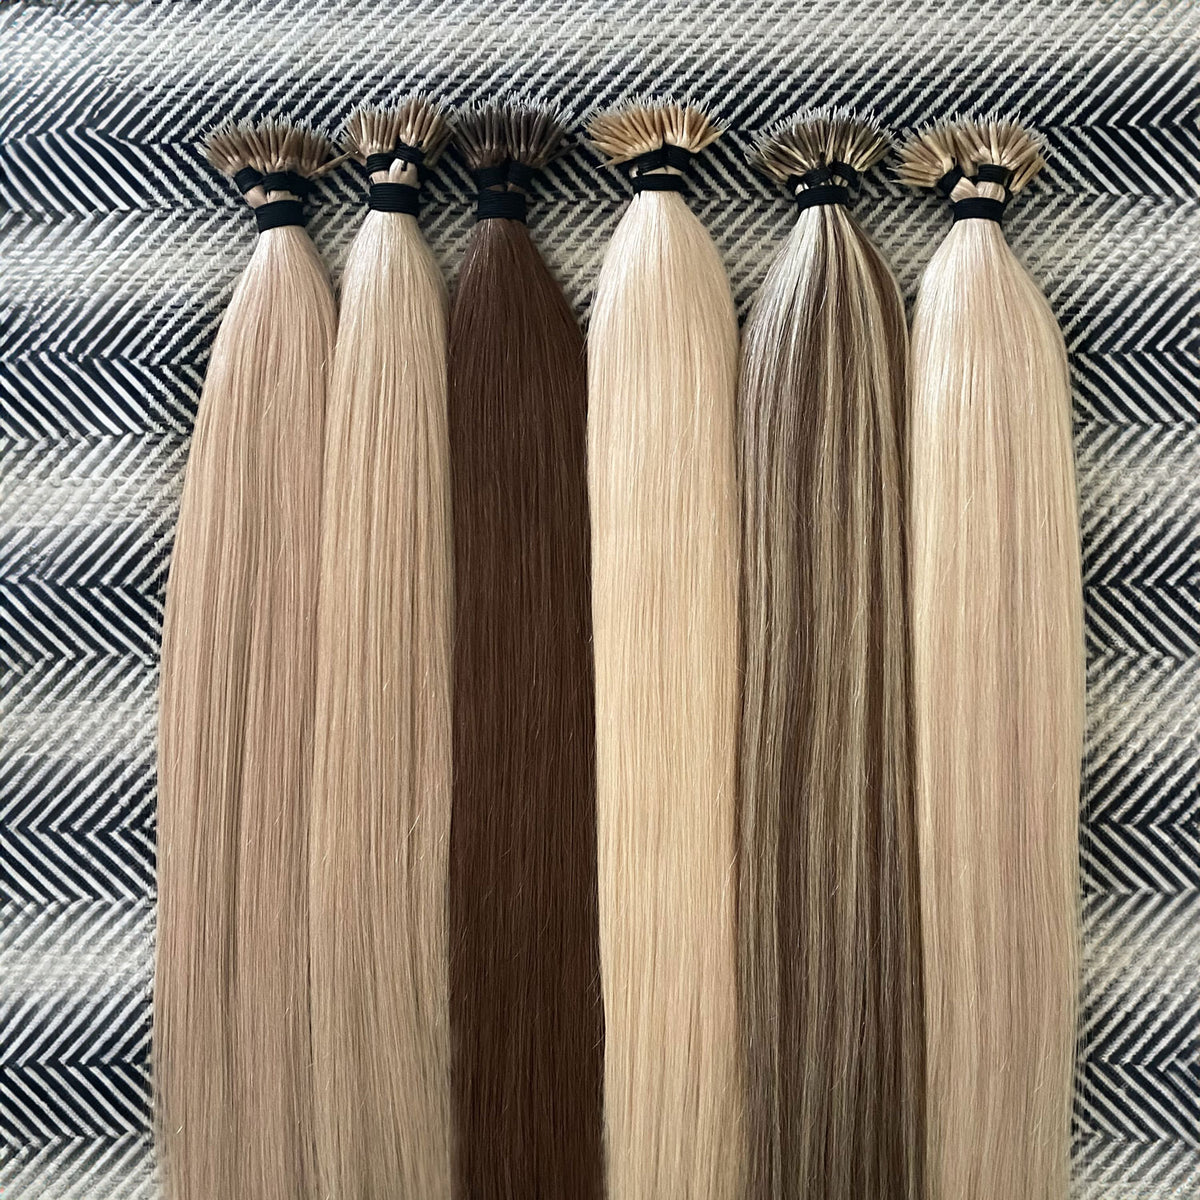 Wholesale Hair Extensions Australia with Afterpay 